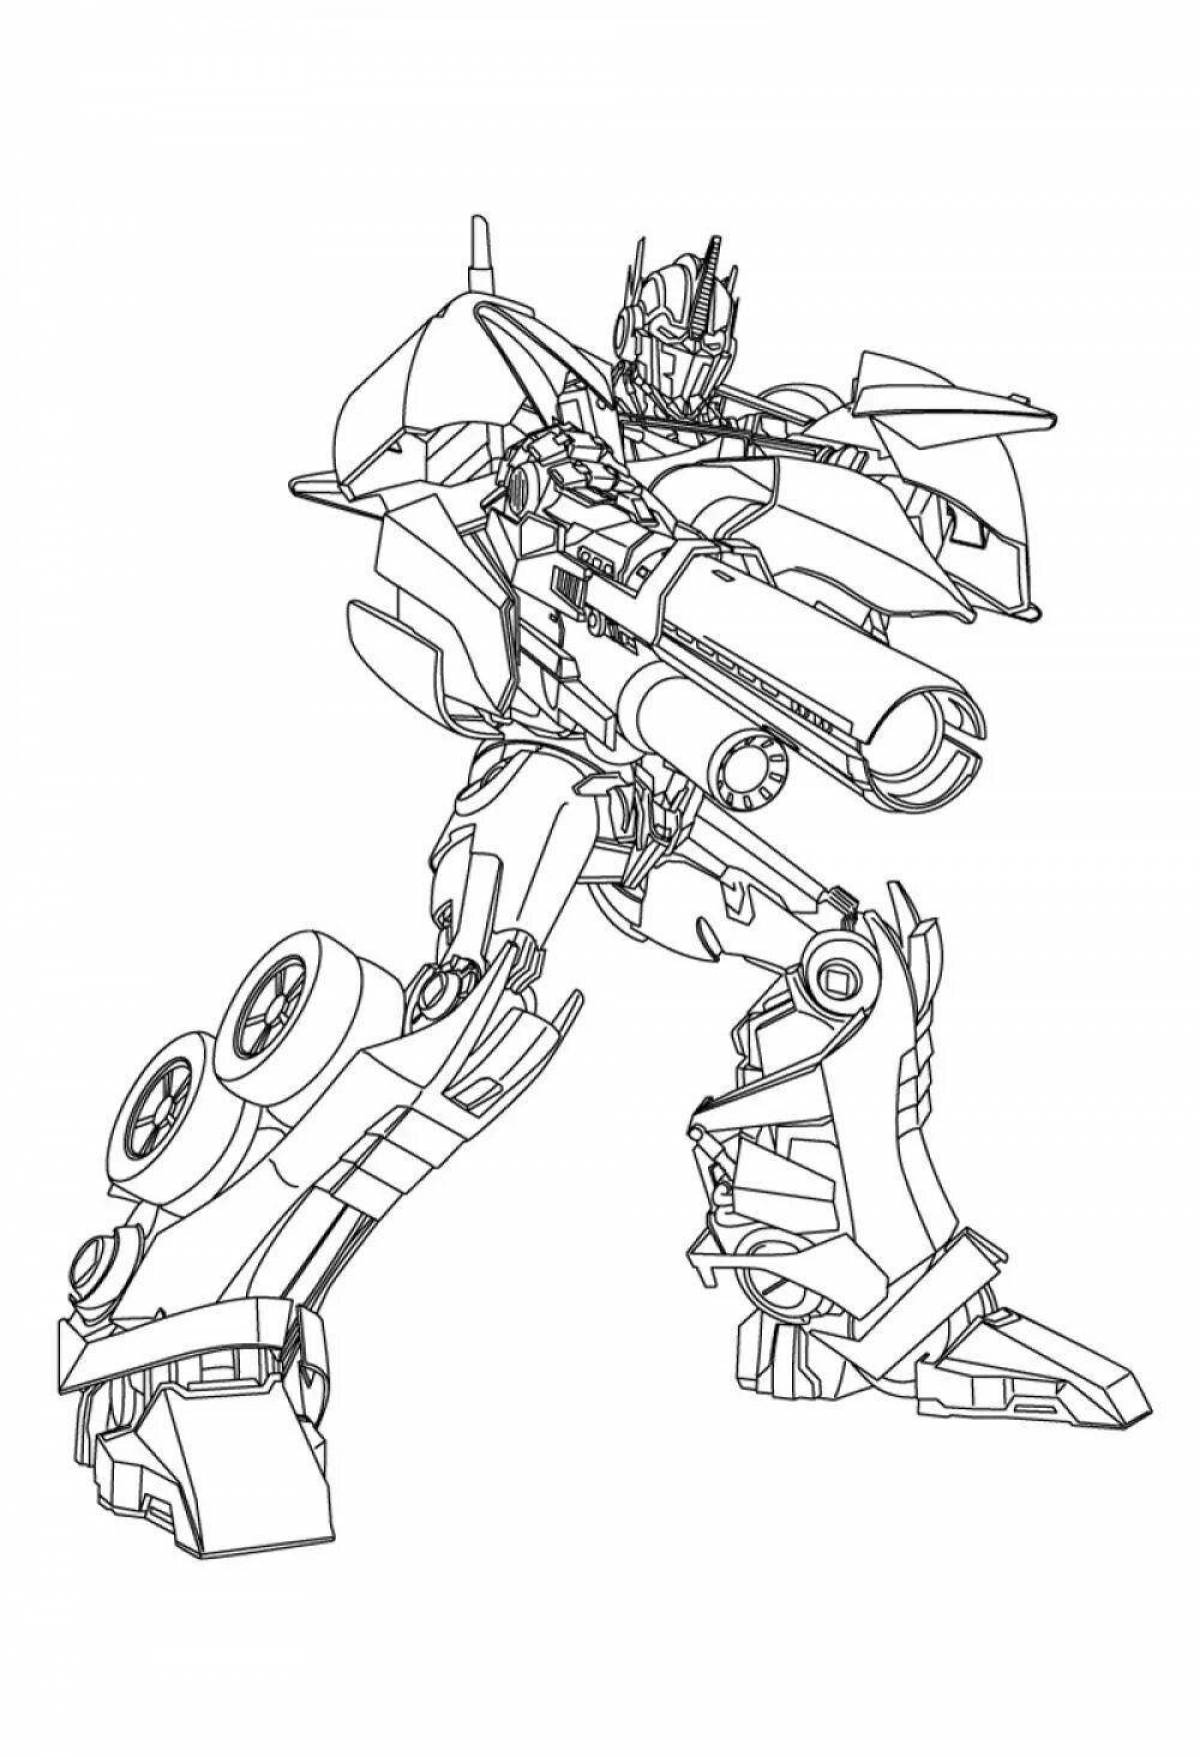 Shiny barricade coloring page